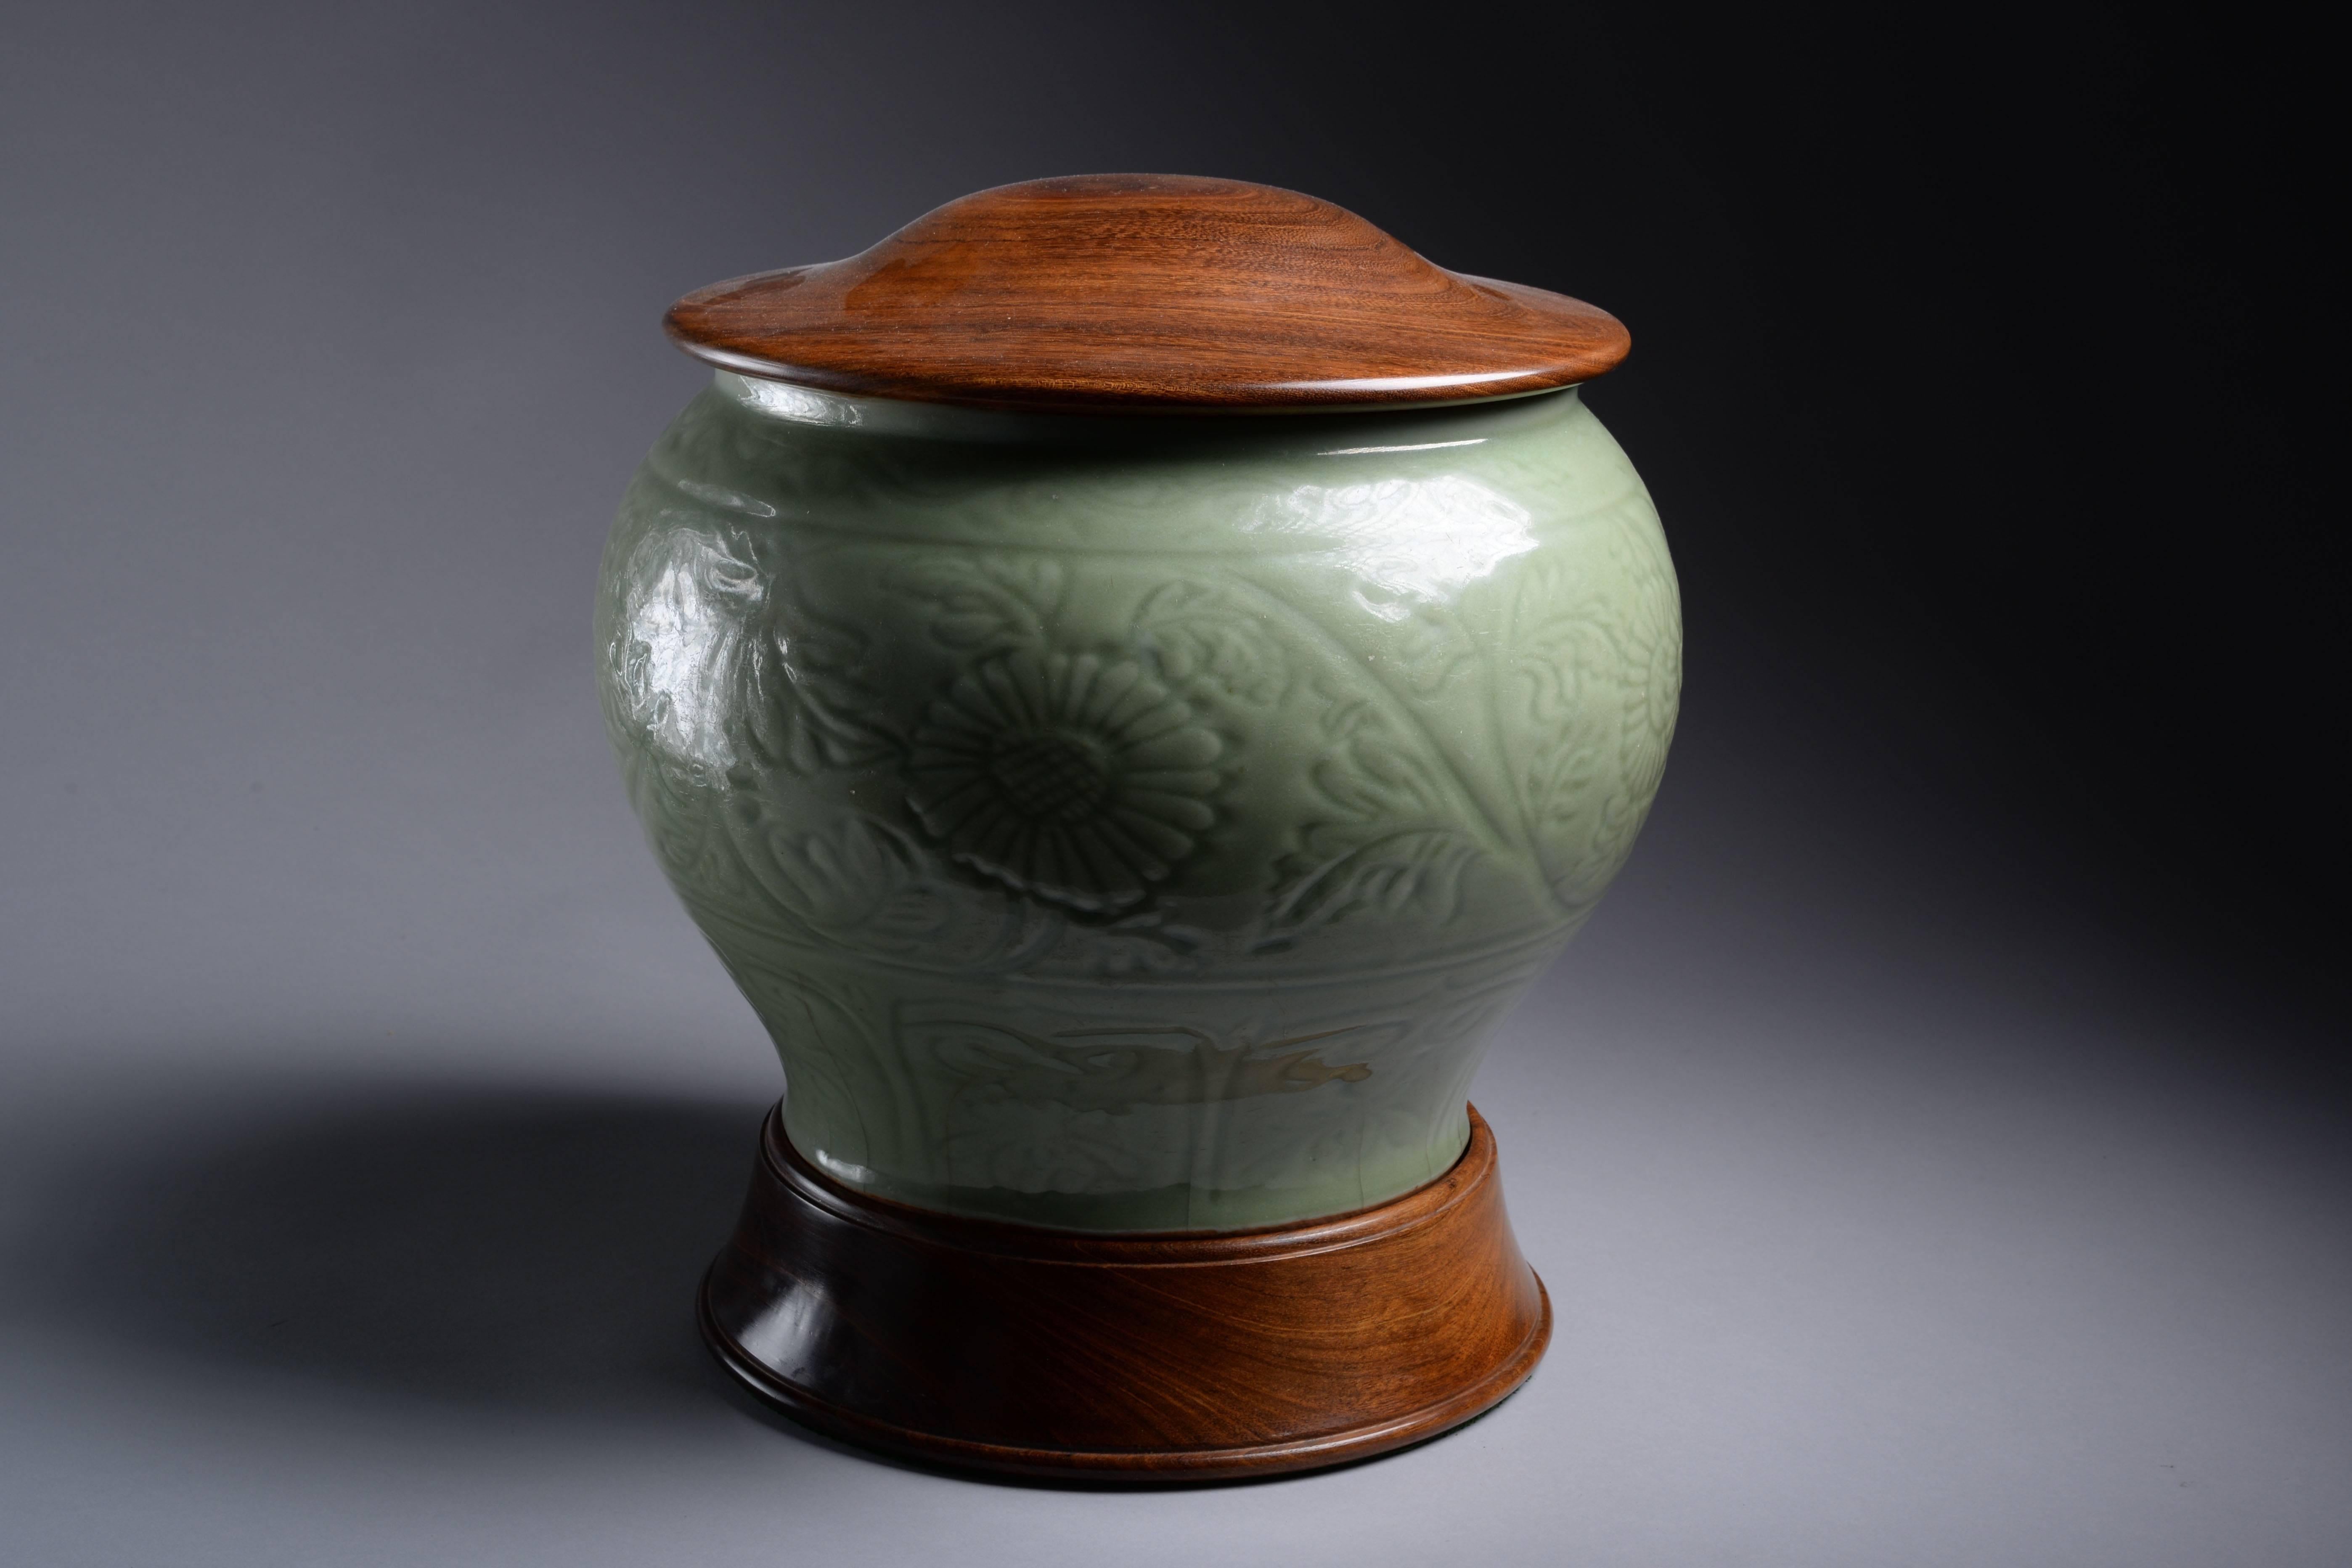 18th Century and Earlier Large 15th Century Ming Dynasty Vase from an Important Collection